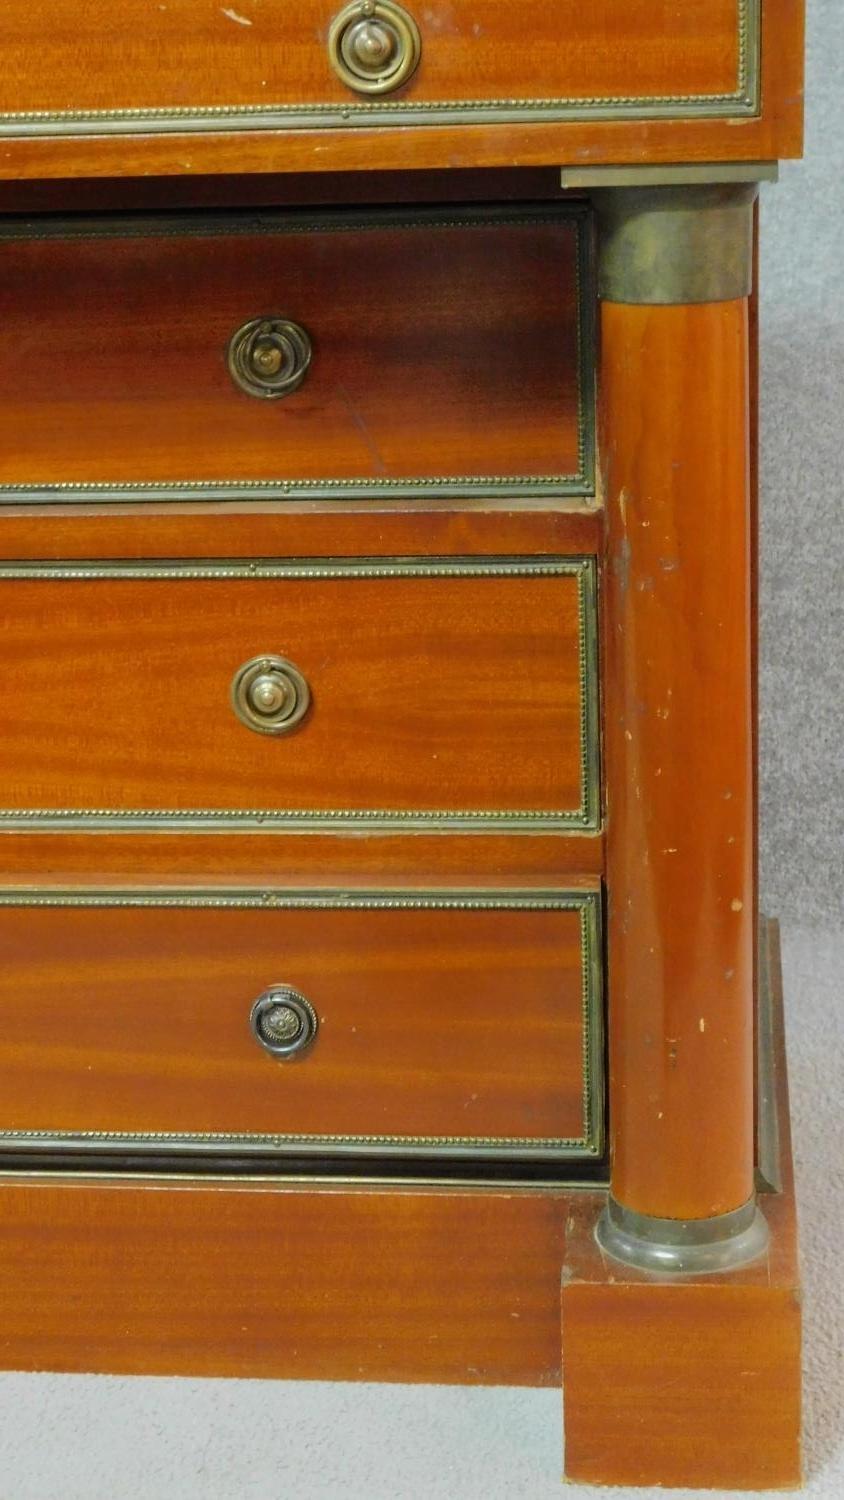 A Georgian style mahogany empire dresser with white marble top, decorative pillars to the sides - Image 5 of 5